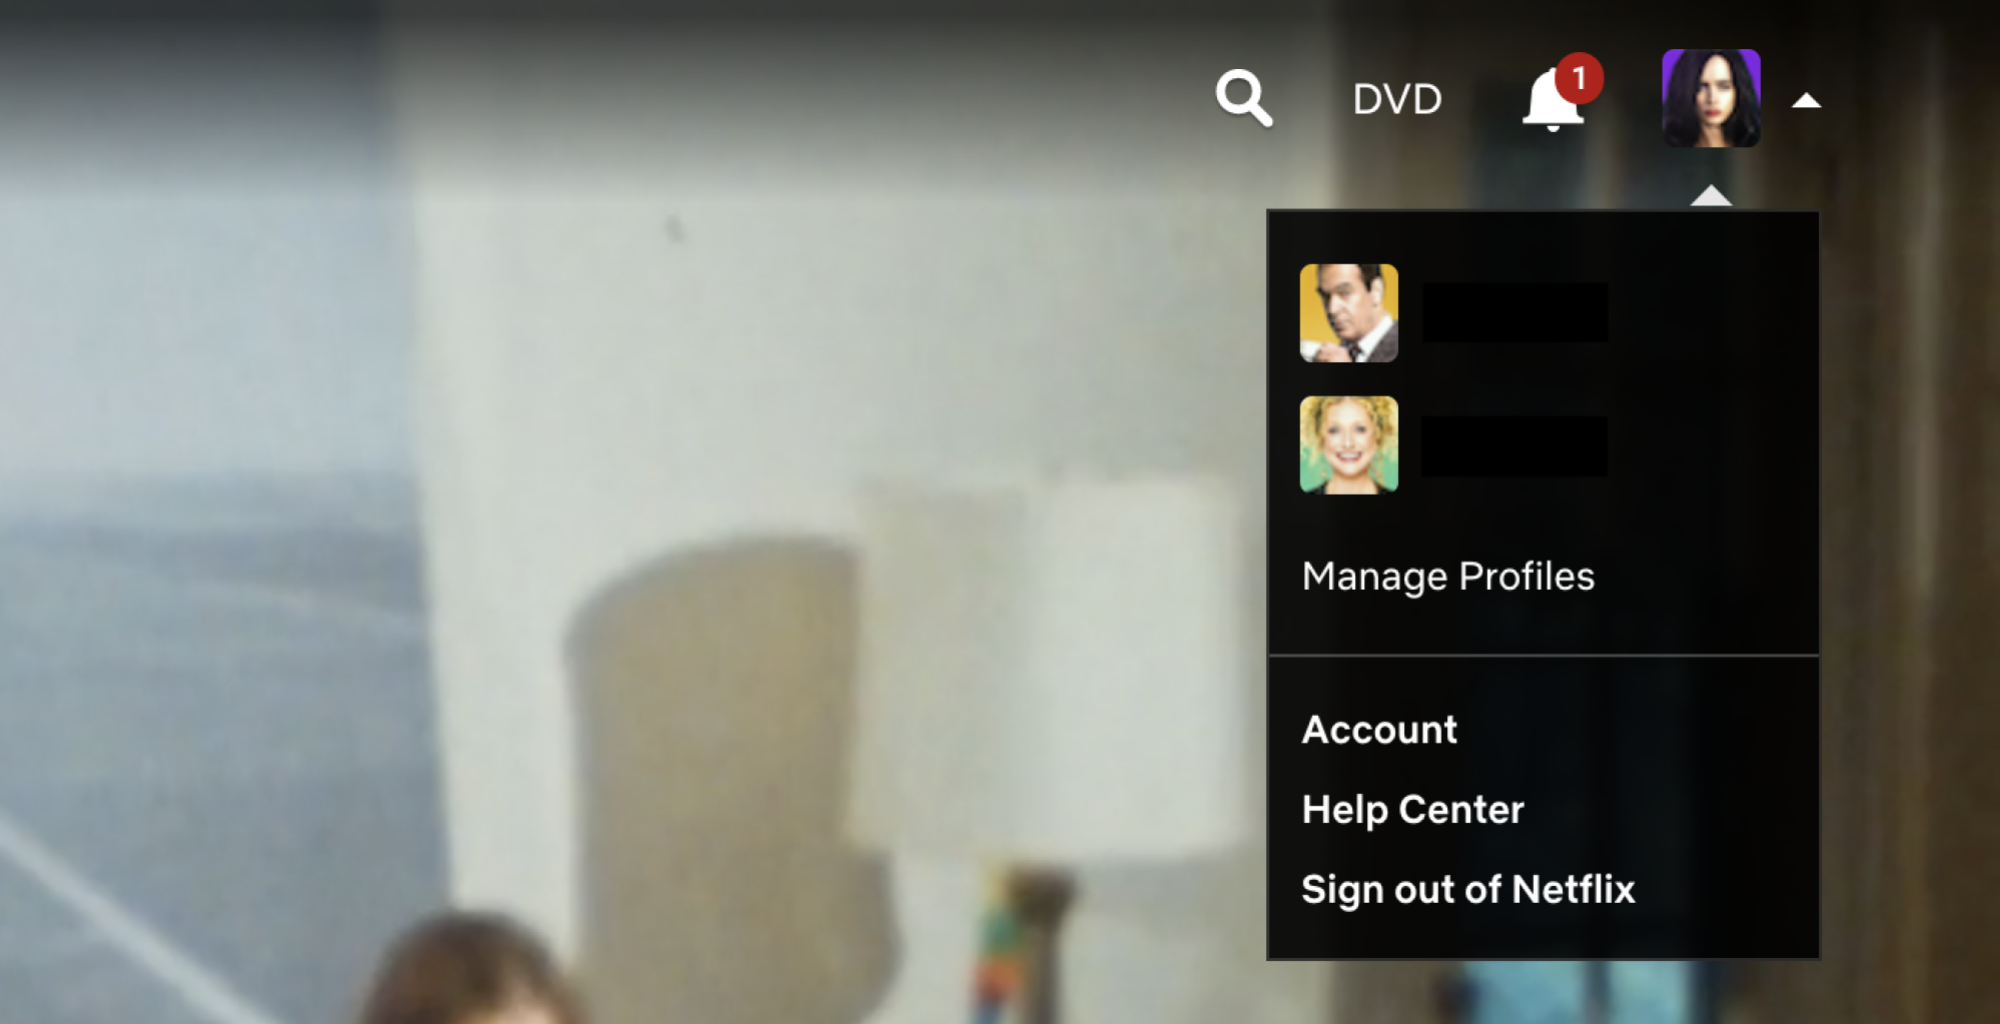 A screen shot of a web browser on Netflix.com, with the profile dropdown menu and option to sign out.